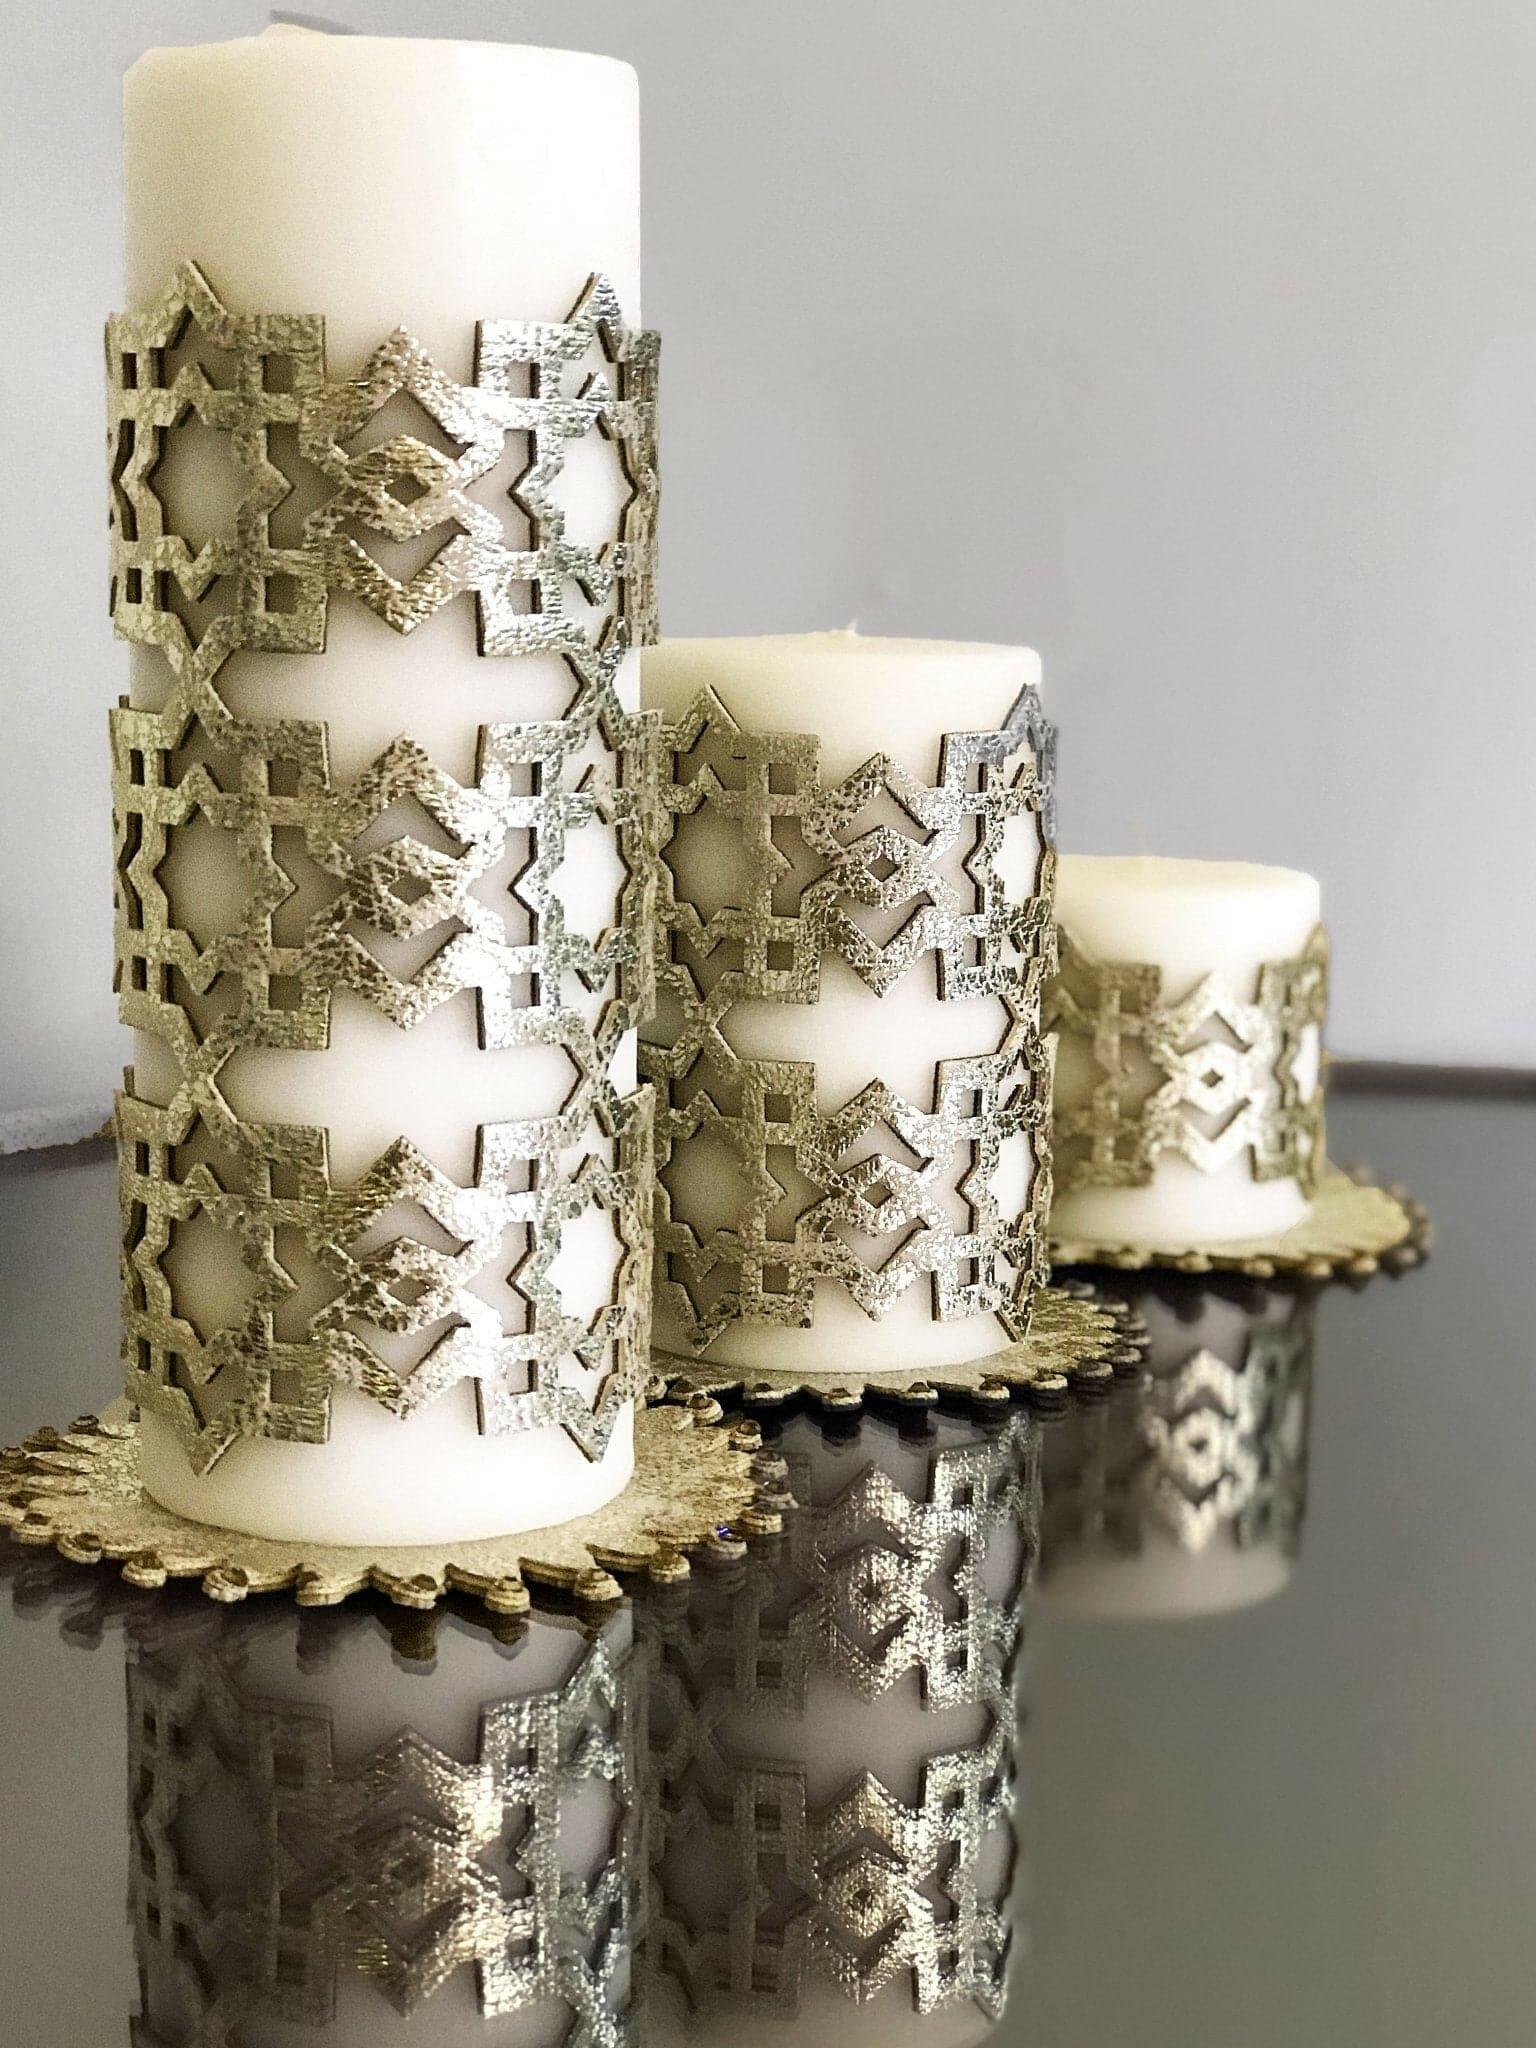 Ottoman Gold Color Candle Set of 3, Leather Geometric Pattern, Decorative Creative Home Designs Candles,CS-CH-OTMN-Go